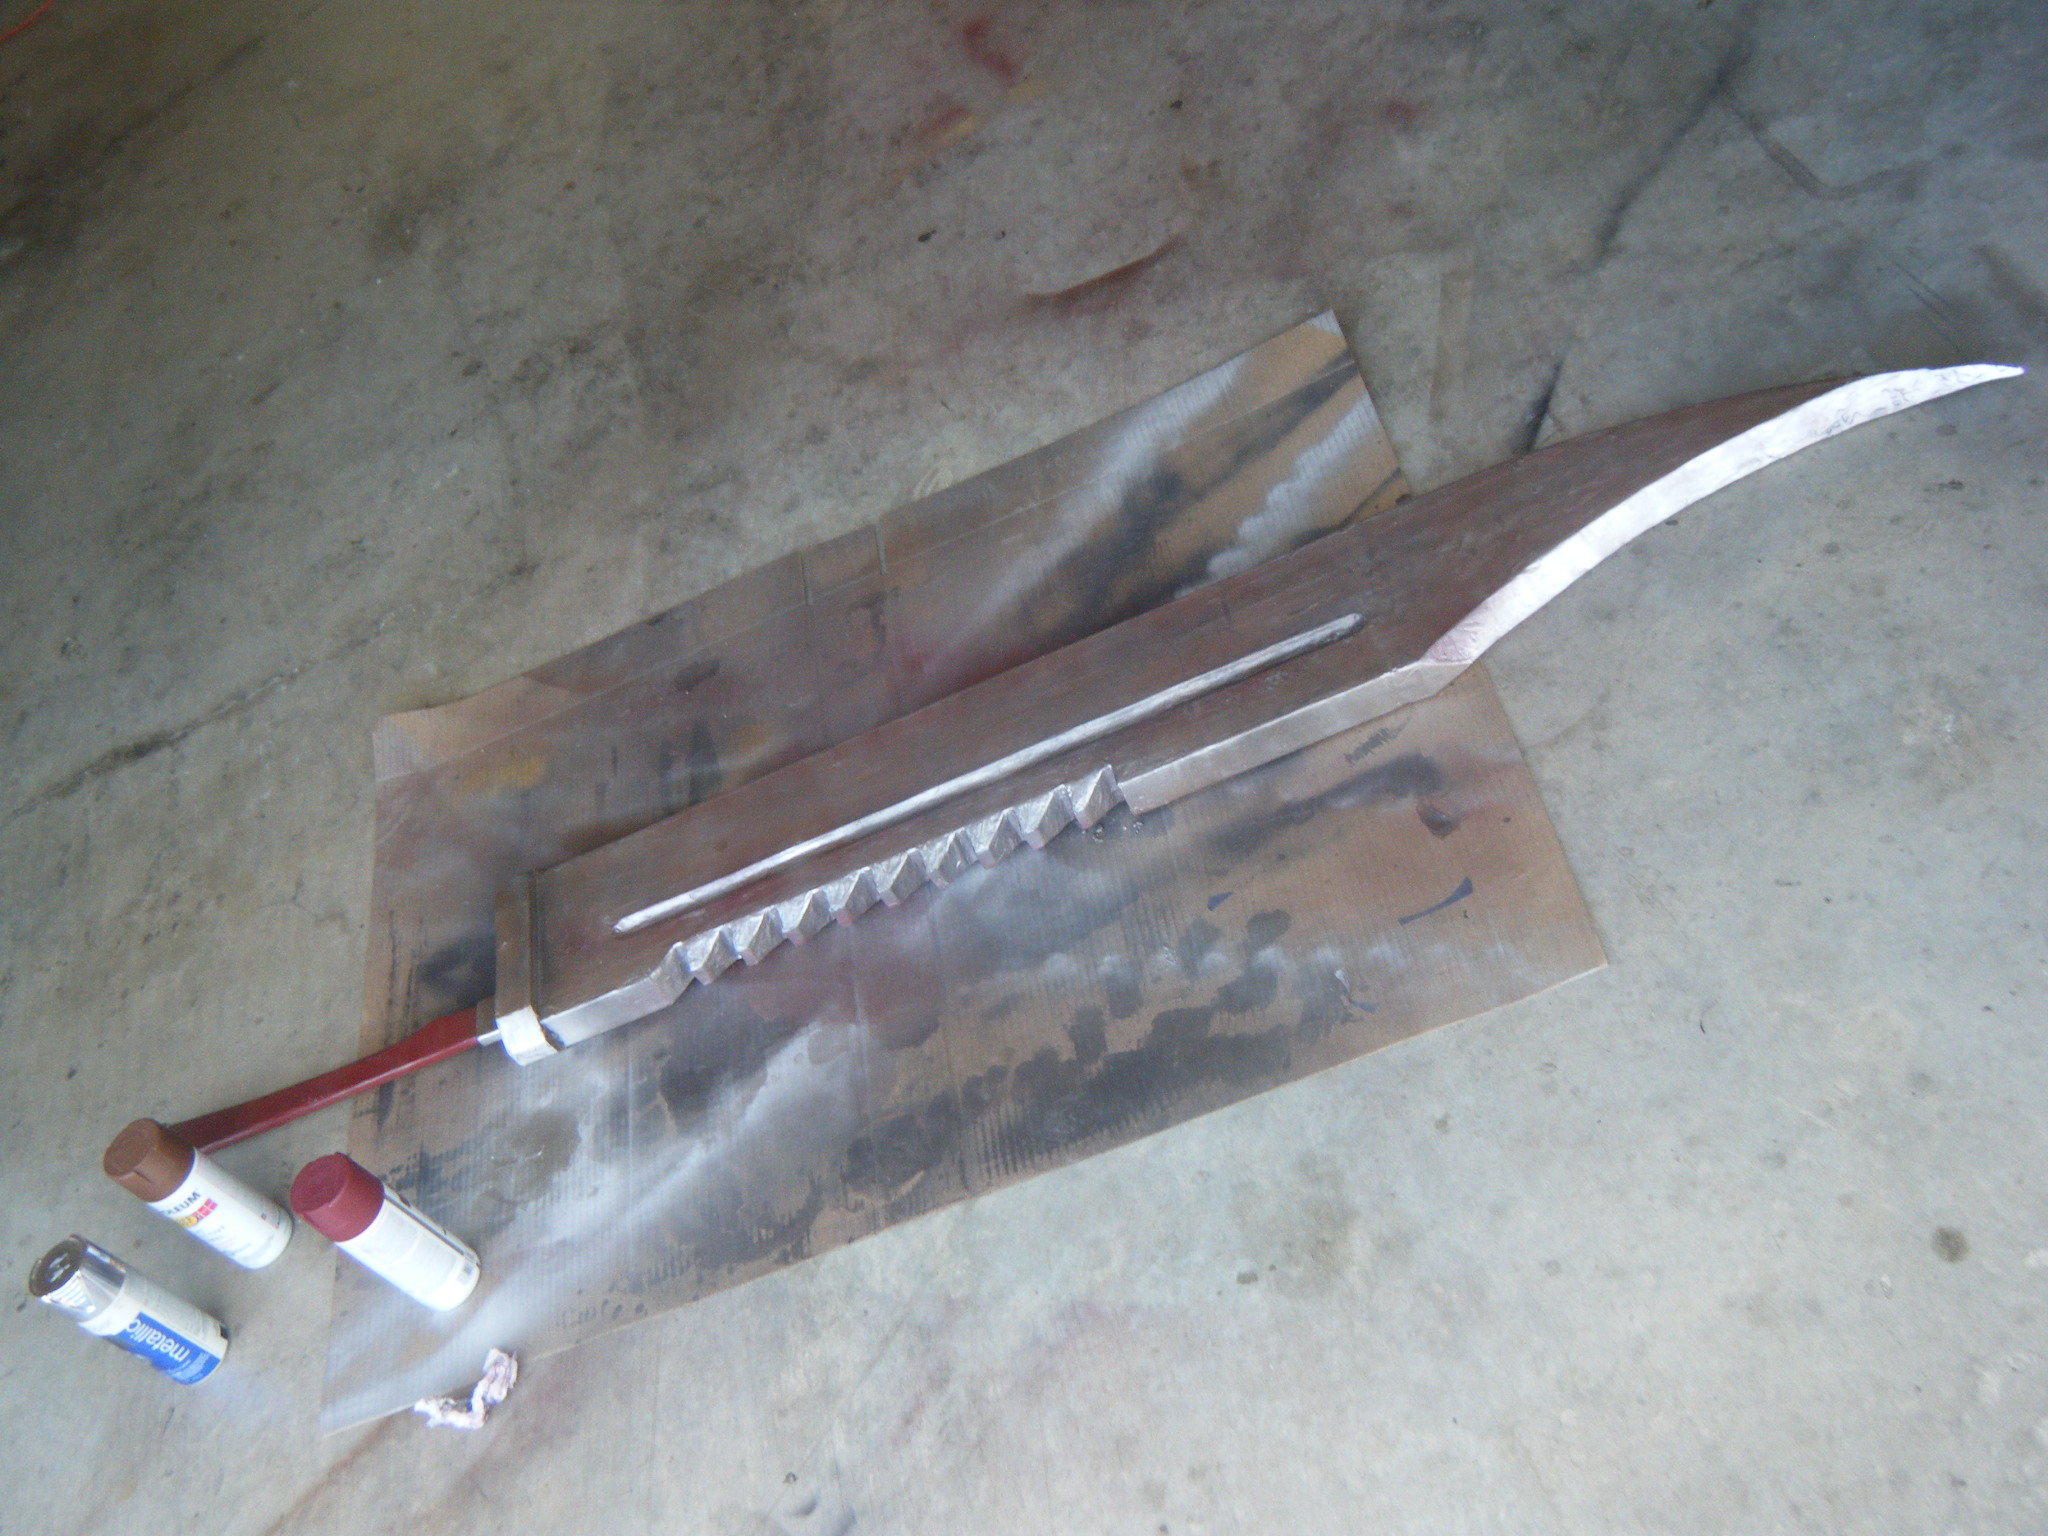 Rage Gear Props - Pyramid Head WIP sword made with